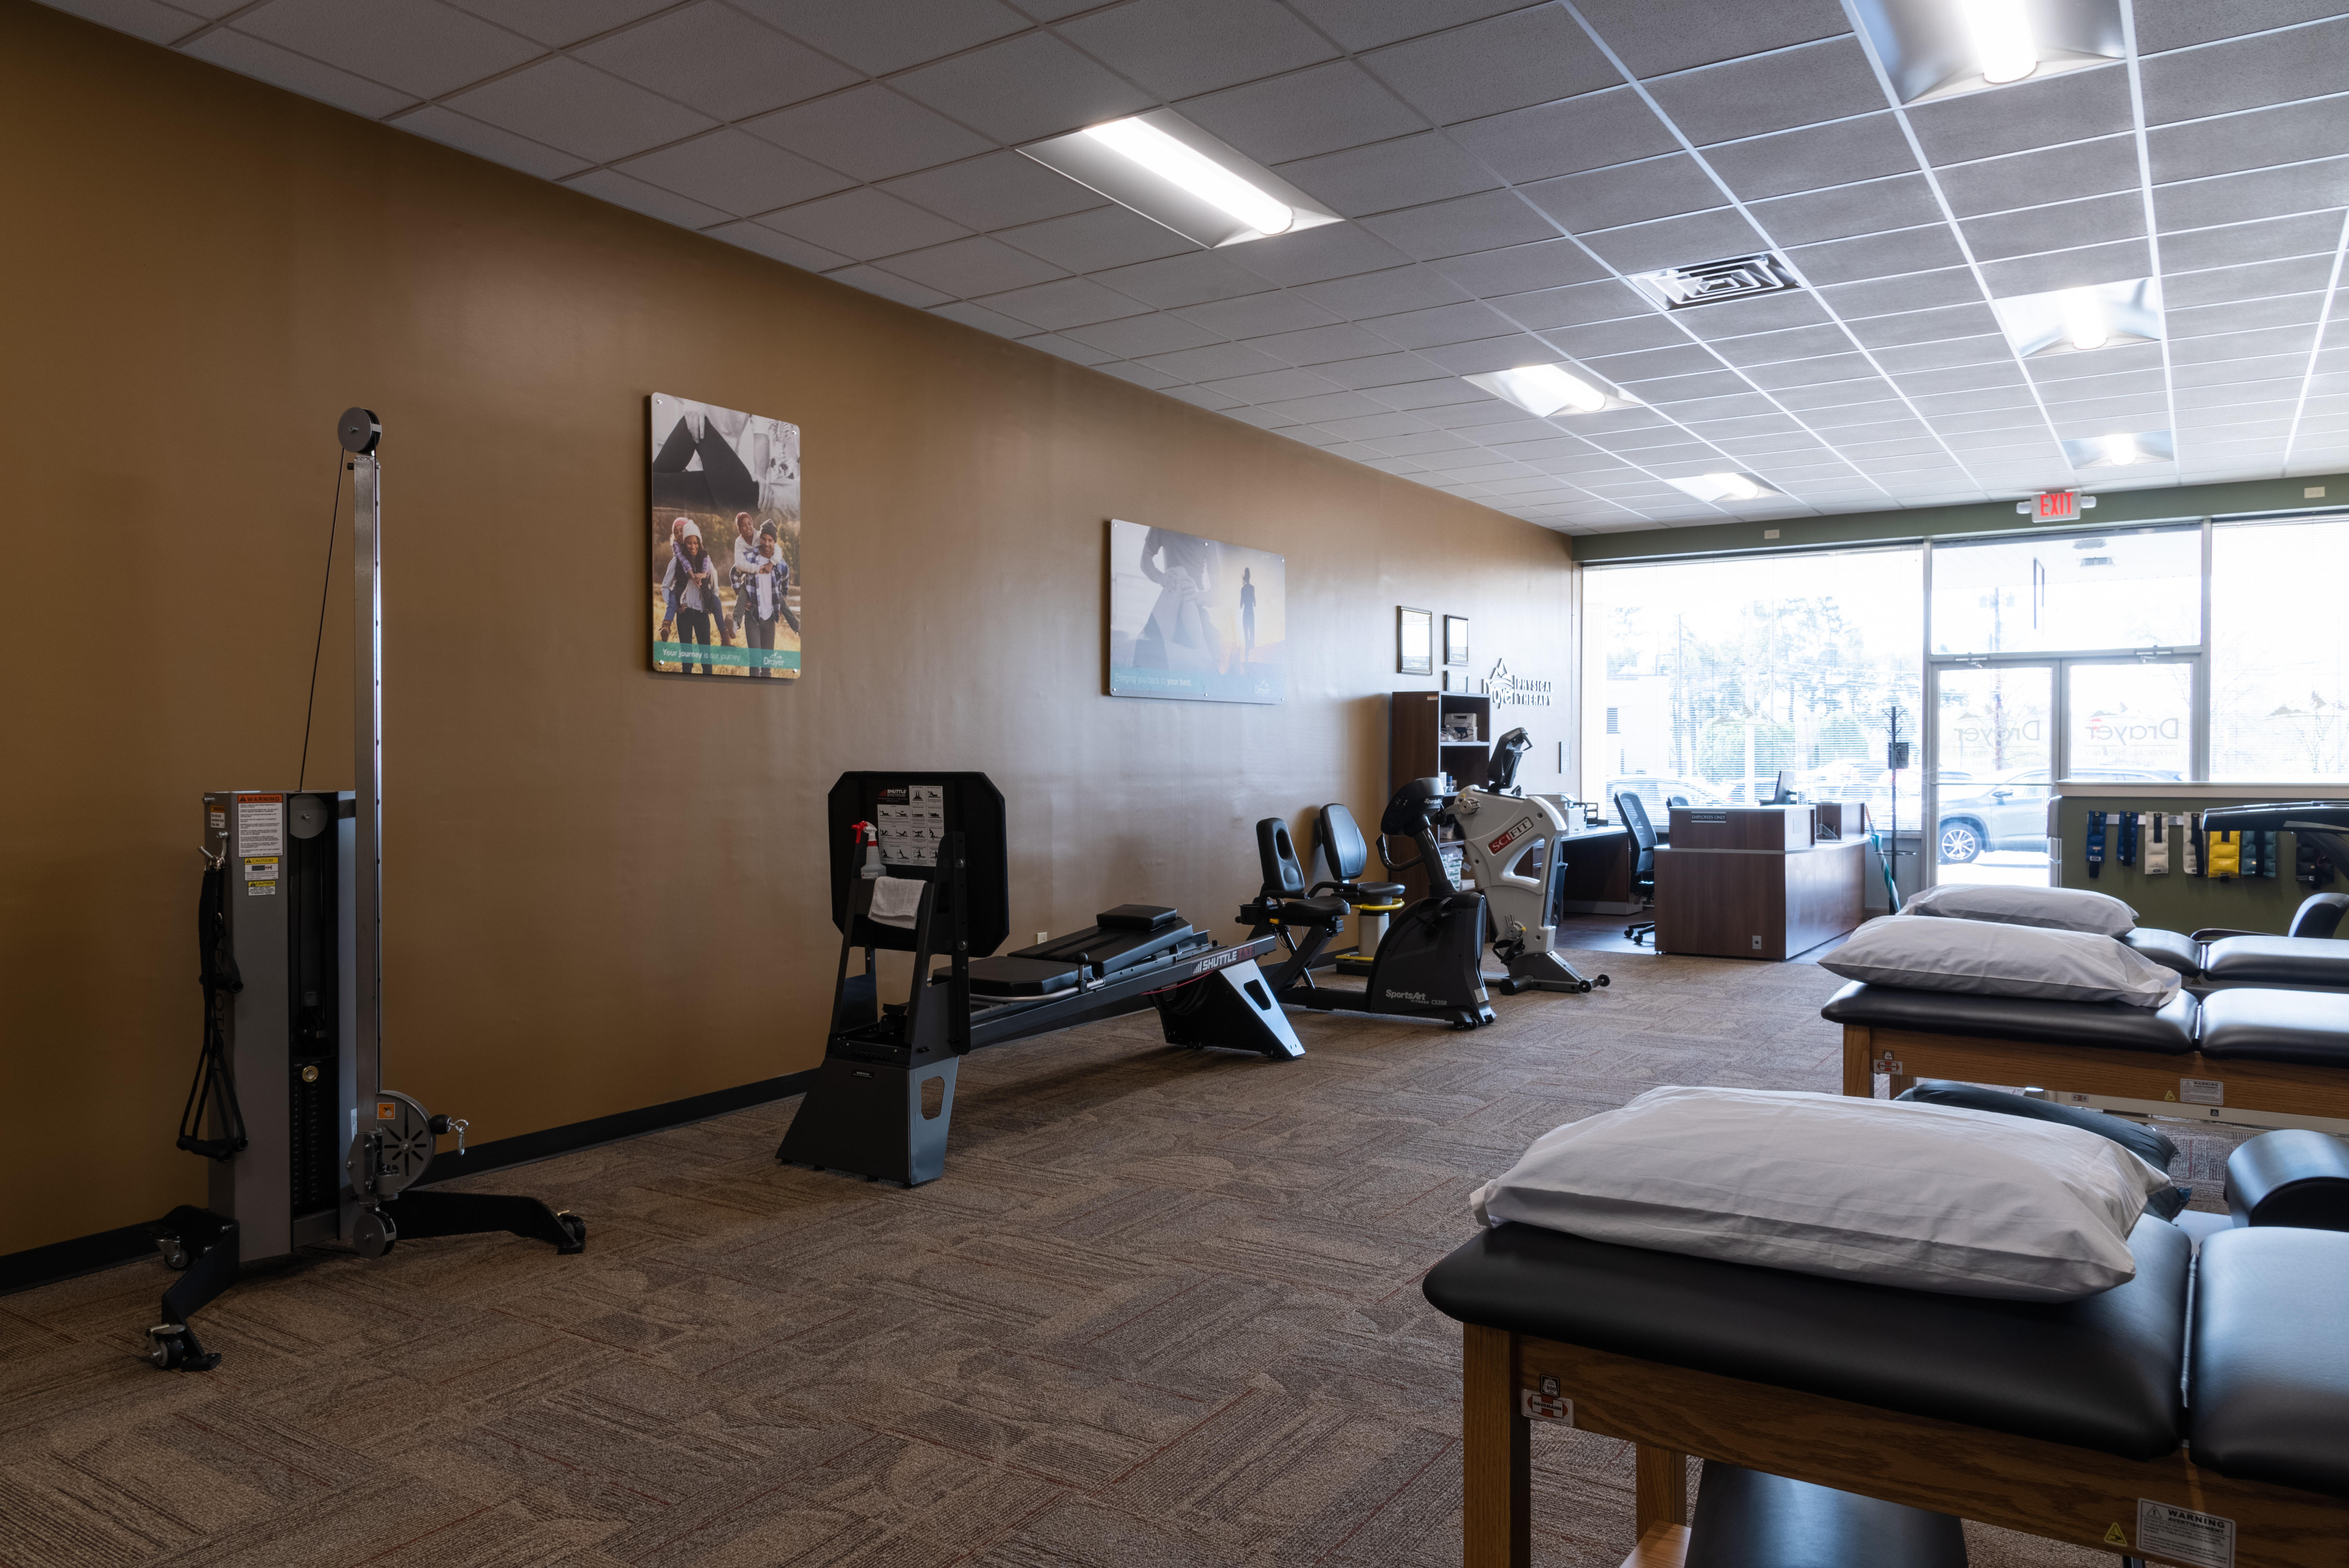 Image 6 | Drayer Physical Therapy Institute